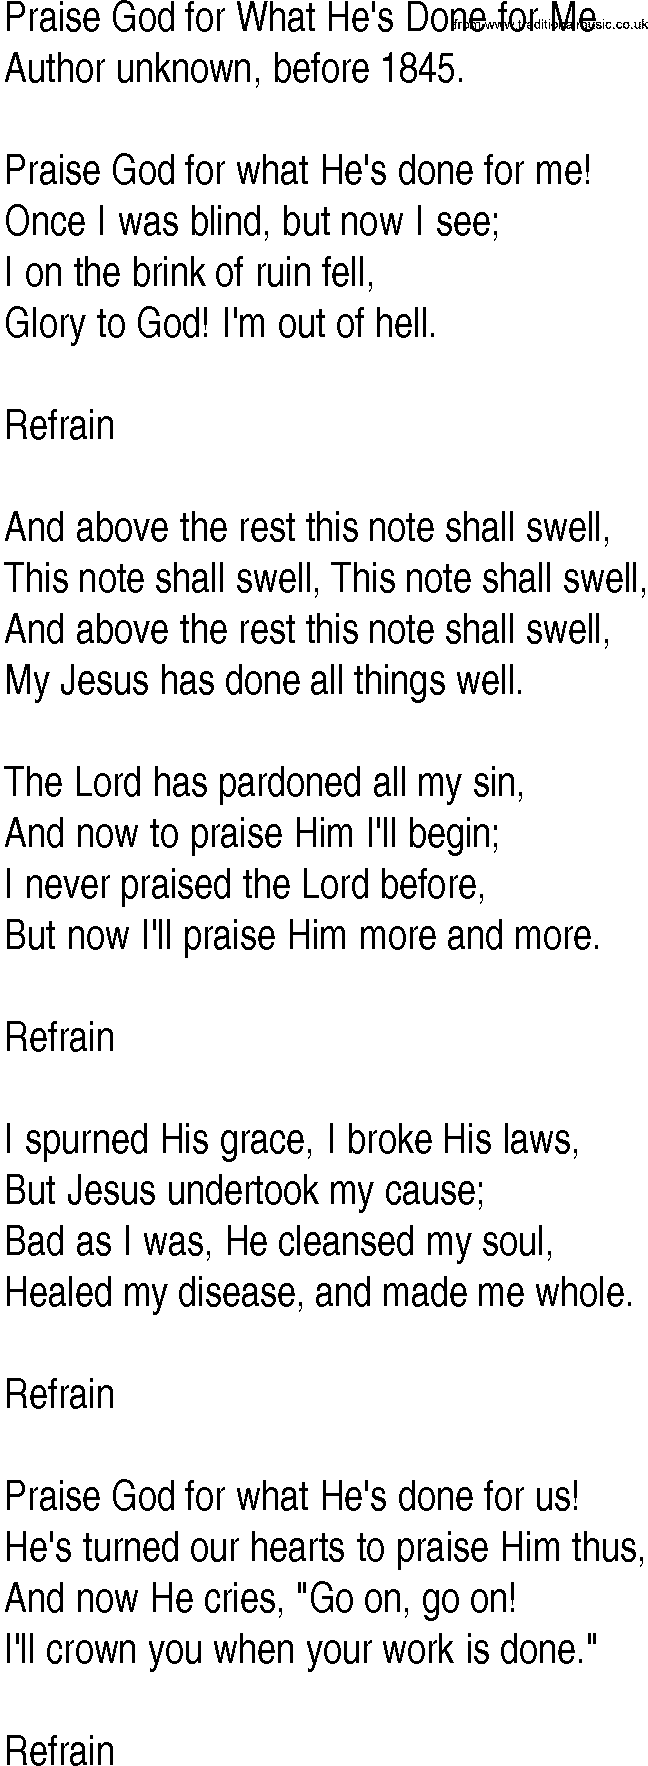 Hymn and Gospel Song: Praise God for What He's Done for Me by Author unknown before lyrics